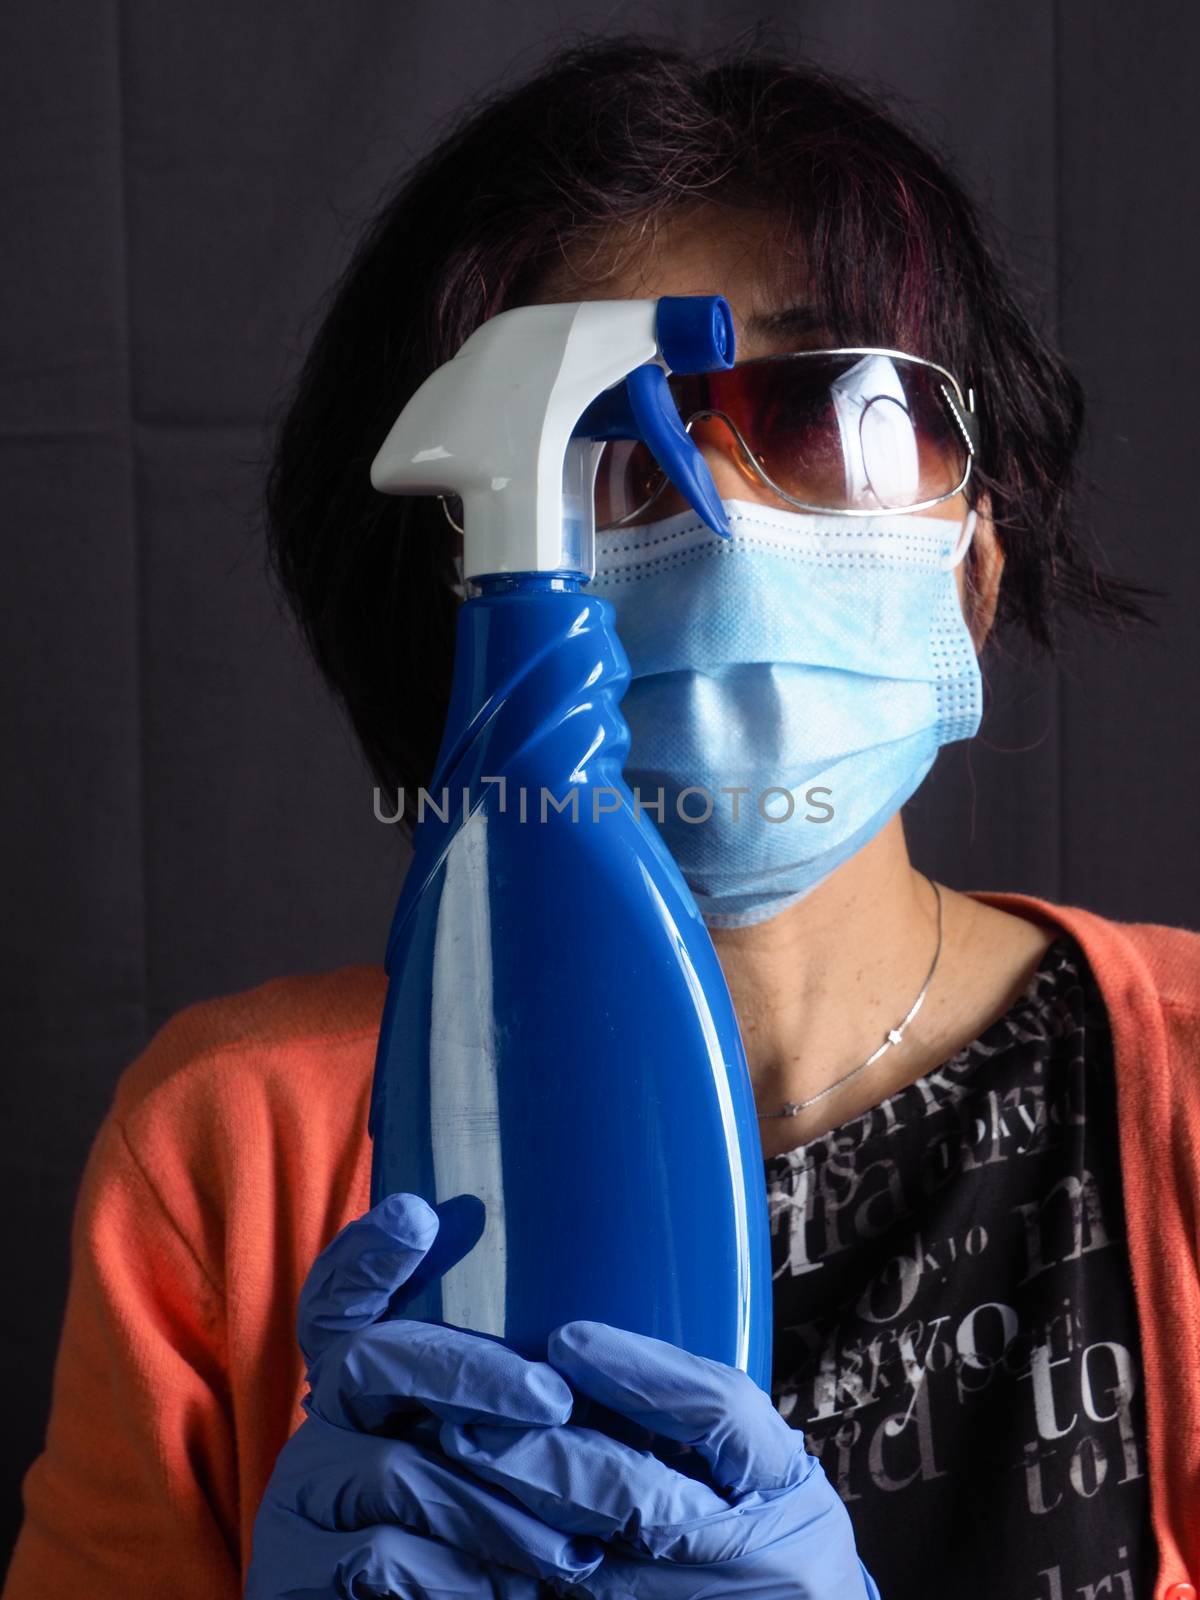 funny humorous adult asian 40s 50s woman wearing protection surgical face mask , blue latex gloves, and sun glasses pointing the head with blue sanitizer cleaning  bottle as a weapon as tired of confinement covid concept.